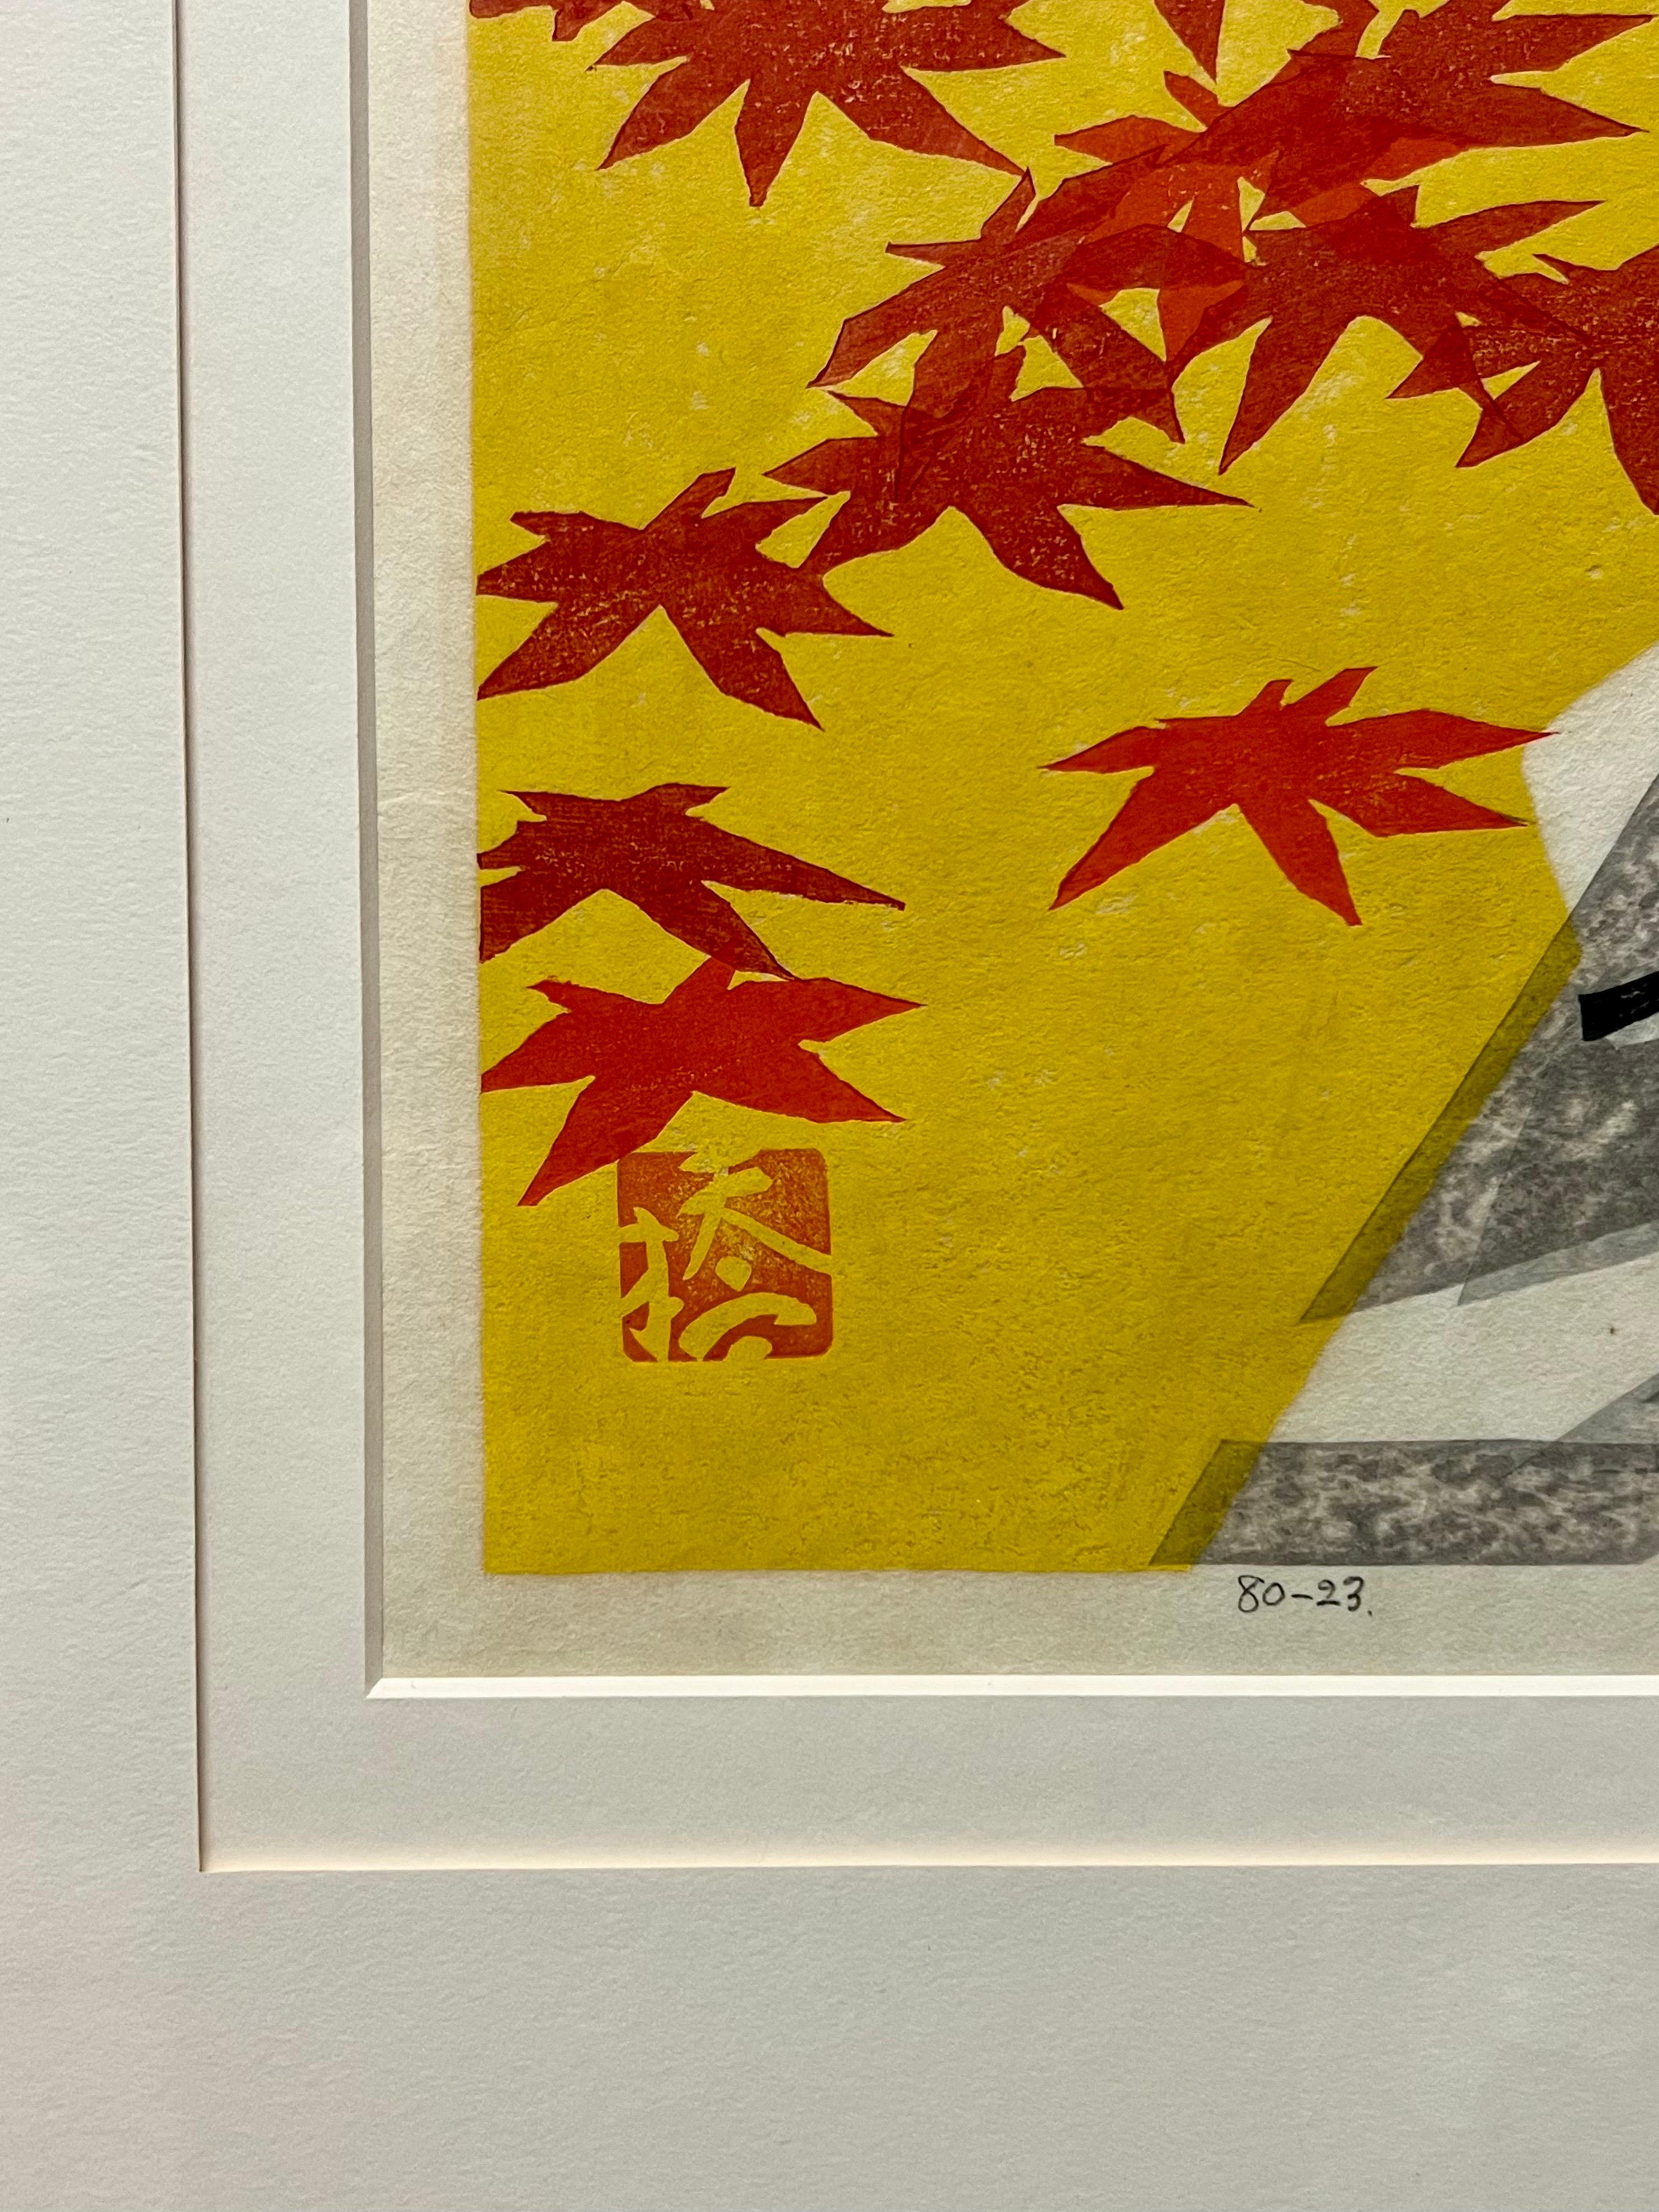 Stunning abstract woodblock by well listed artist Okiie Hashimoto, c1969. Professionally framed in a metal frame with a matte brass finish. 

Okiie Hashimoto was a Japanese artist and educator. Best known as part of the postwar revival of the